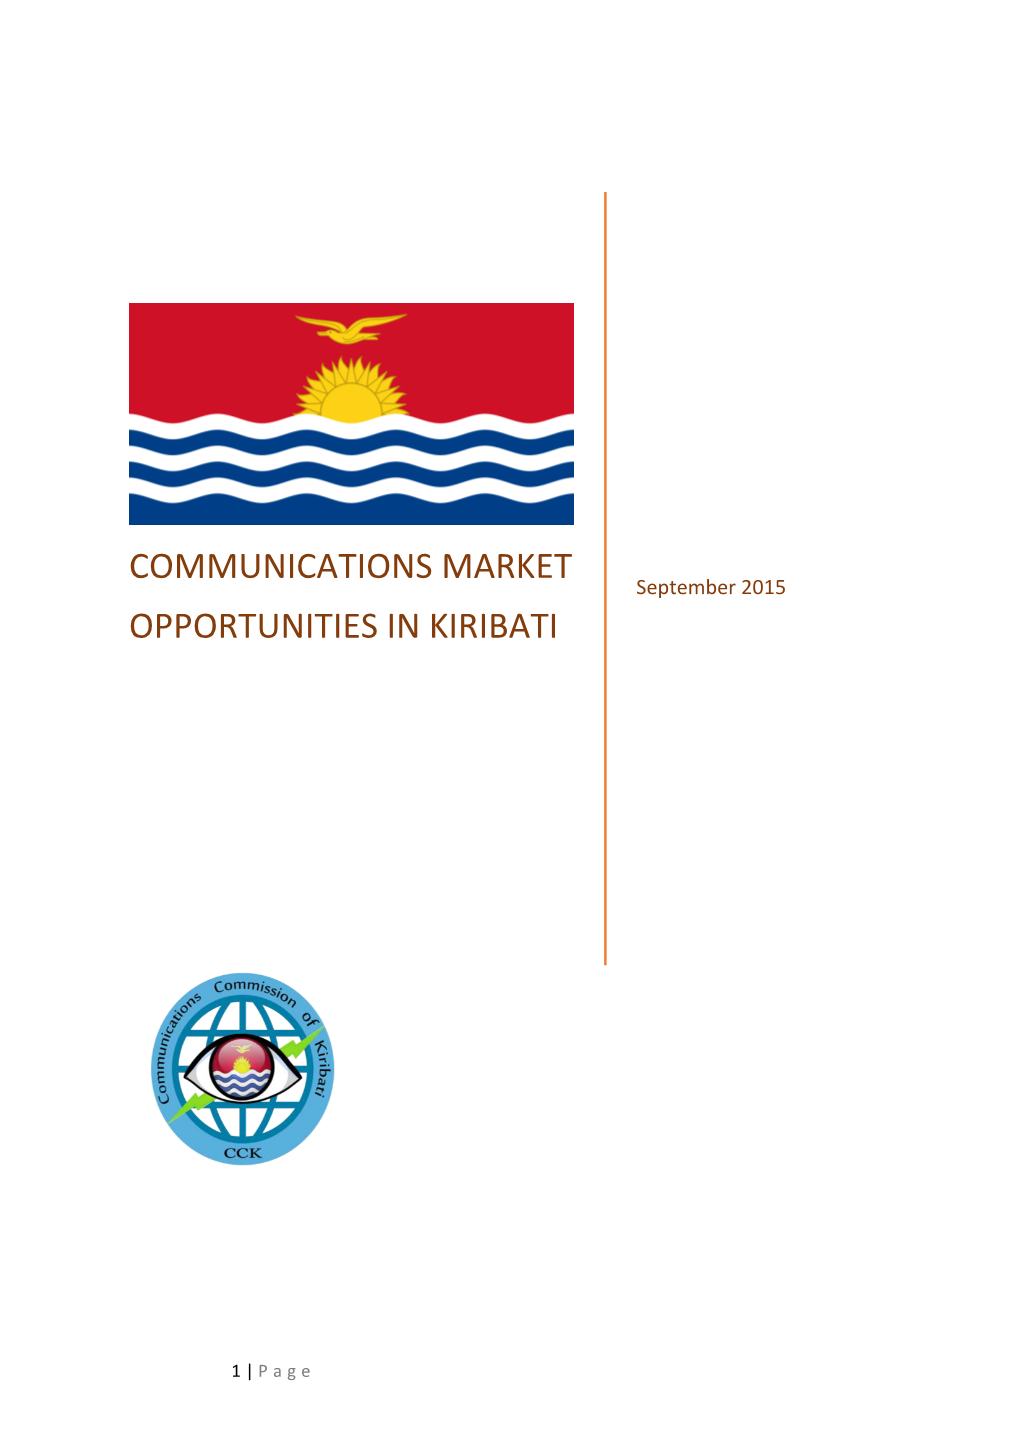 Communications Market Opportunities in Kiribati in Order to Draw Investors’ Attention to the Business Opportunities Offered by Our Country